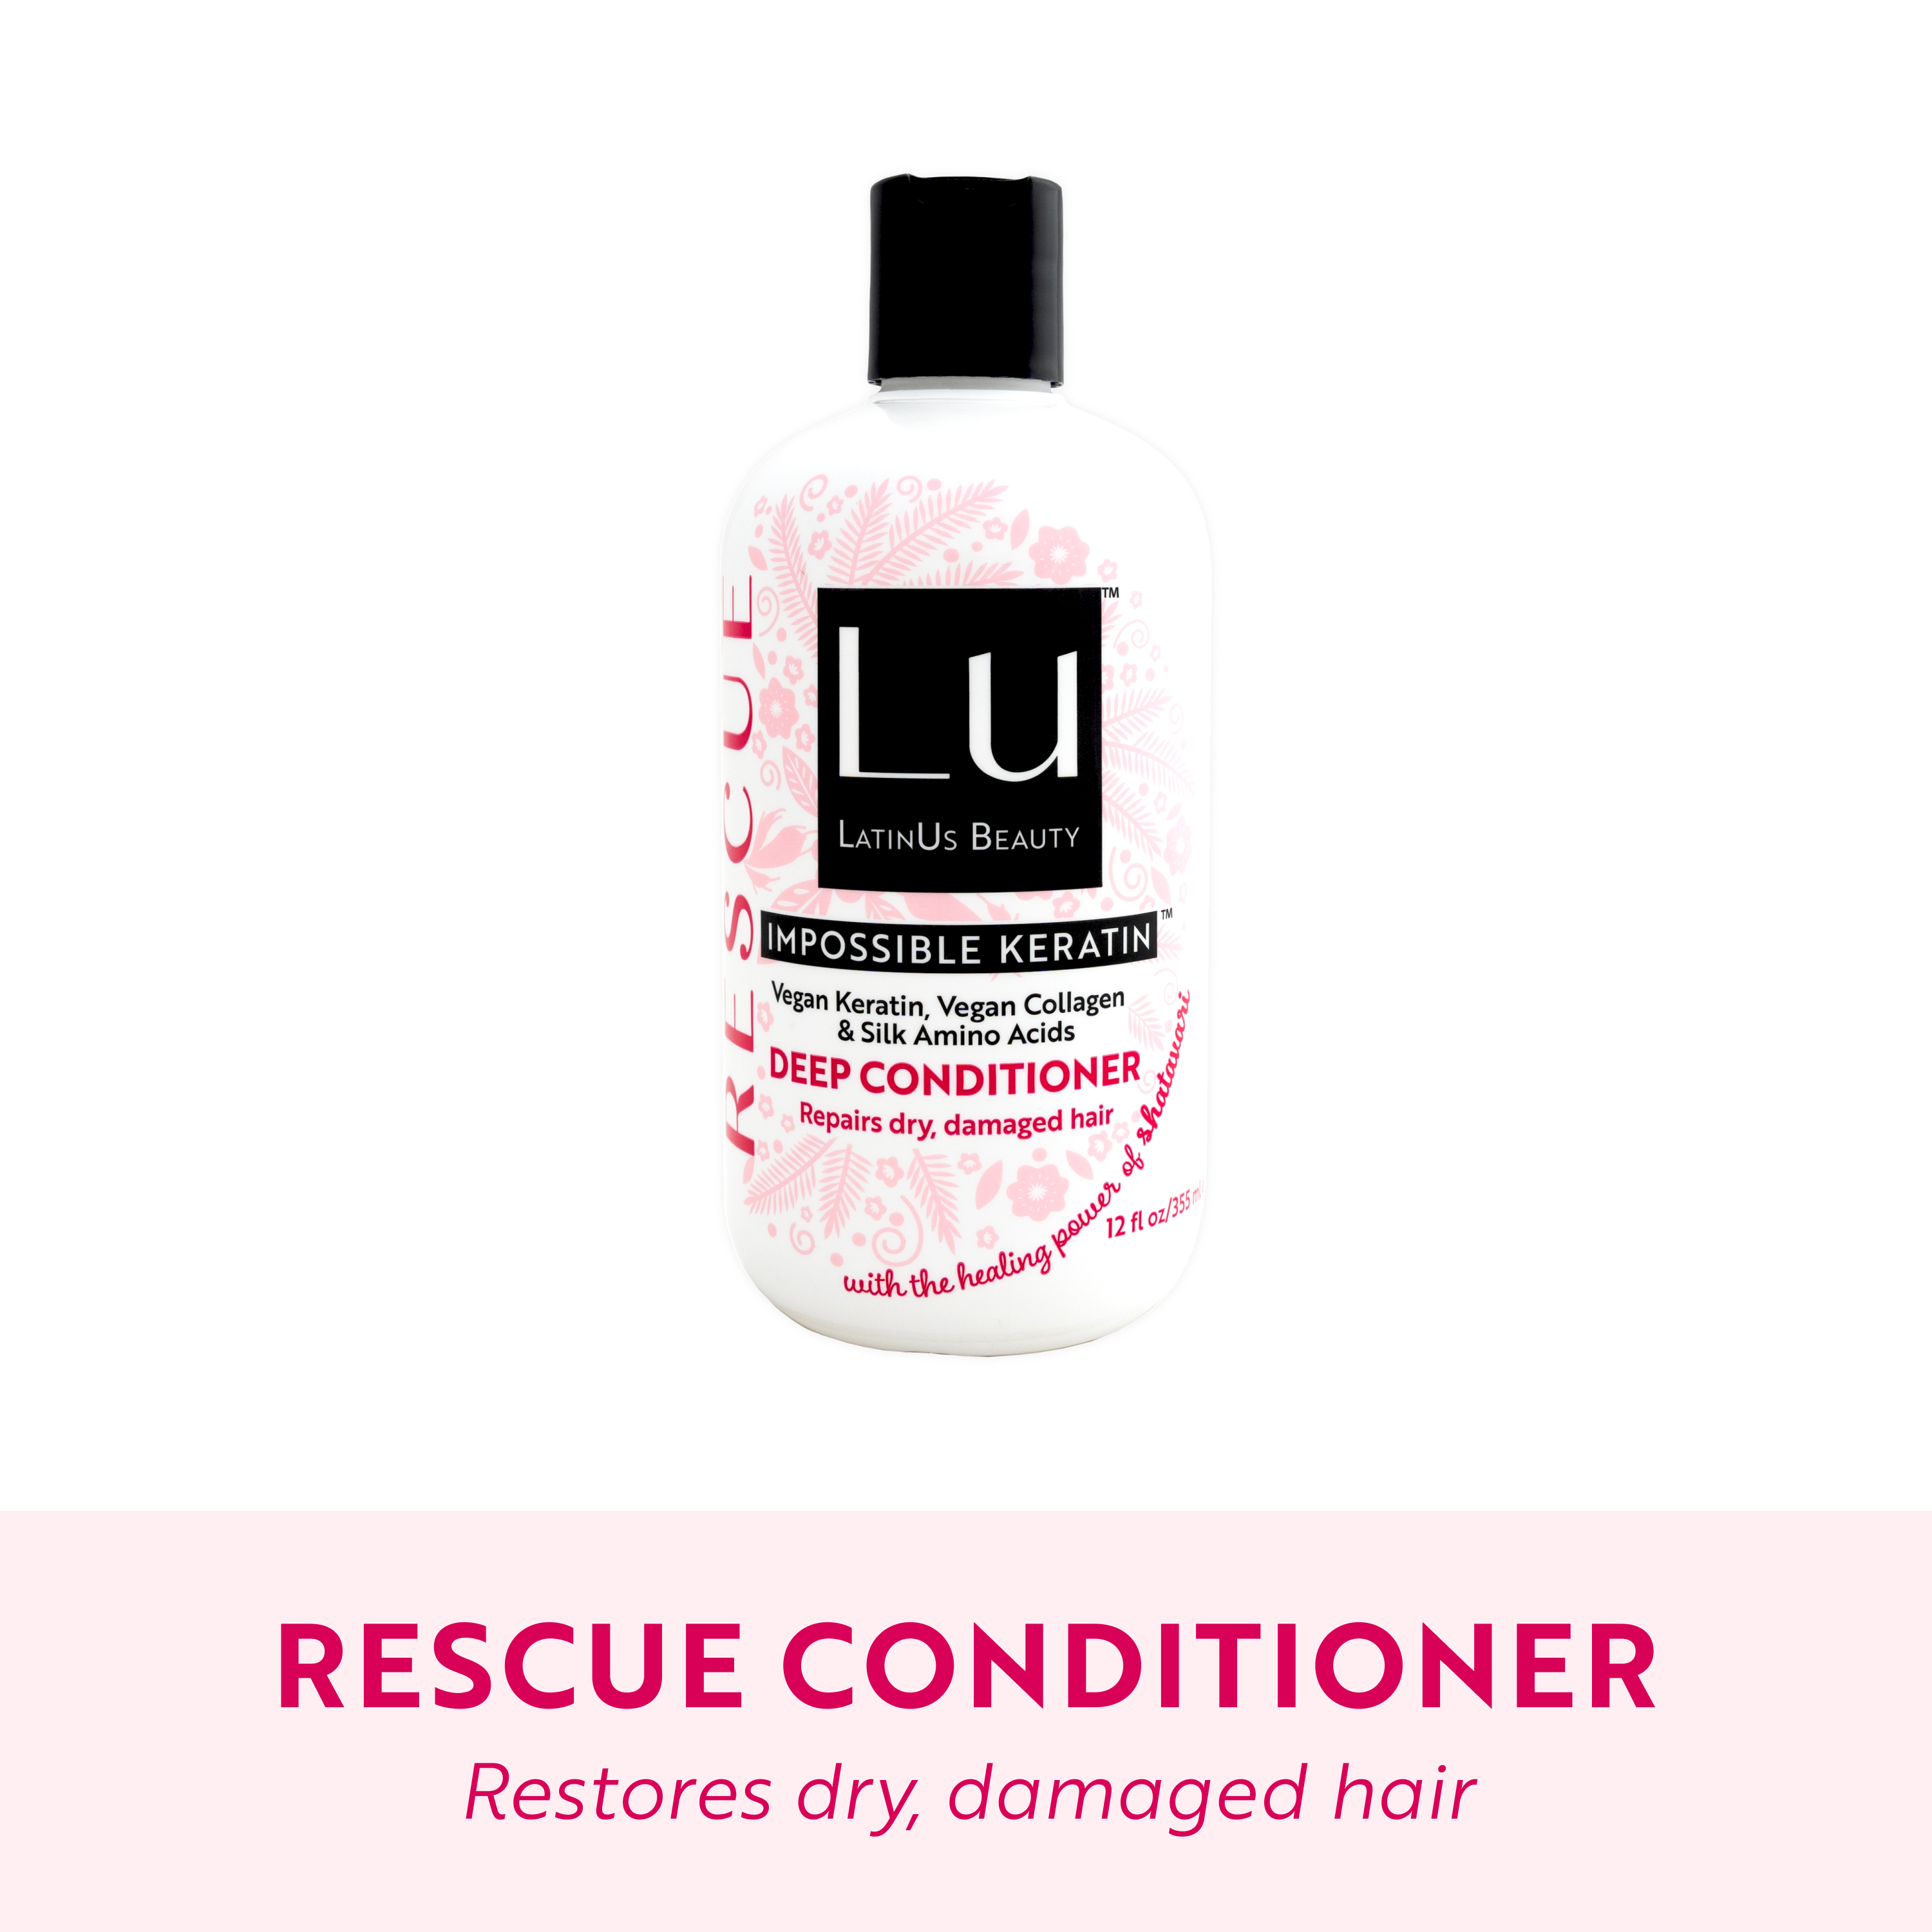 LU LatinUs Beauty Rescue Damage Repair Conditioner with Impossible Keratin, for All Hair Types, 12 oz - image 1 of 10